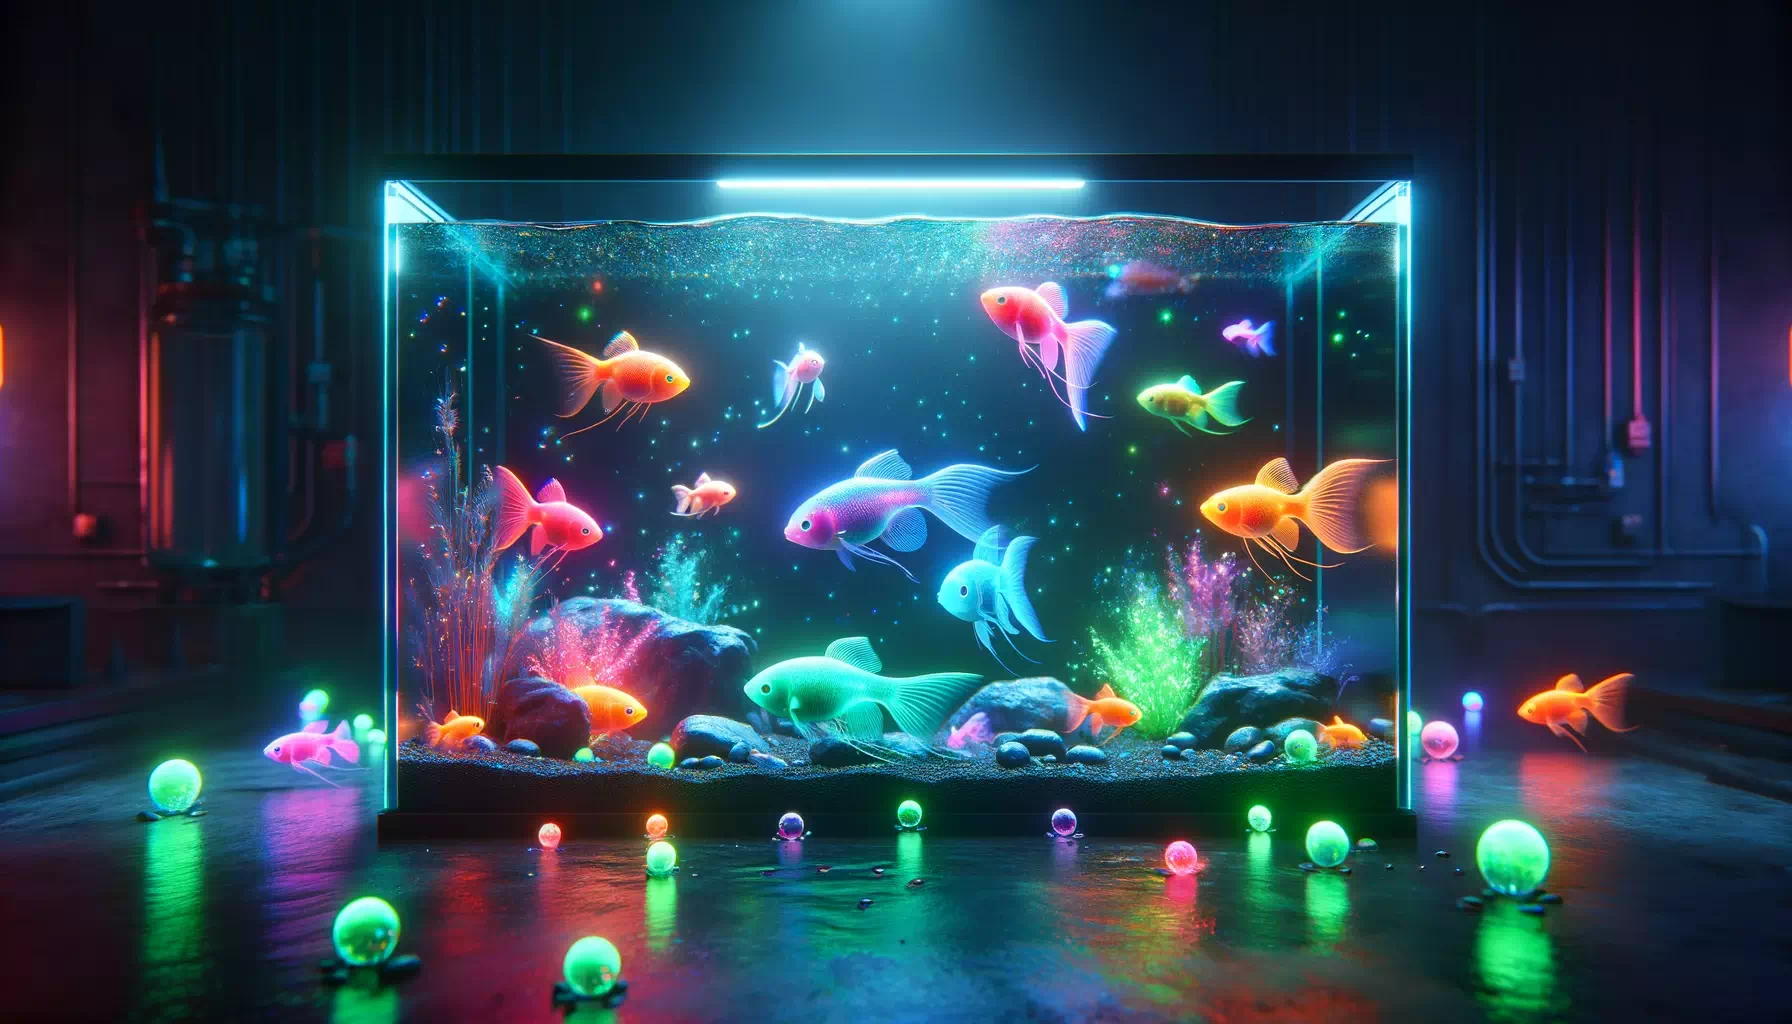 cinematic style of an aquarium with GloFish showcasing their unique glowing properties. The scene depicts various GloFish